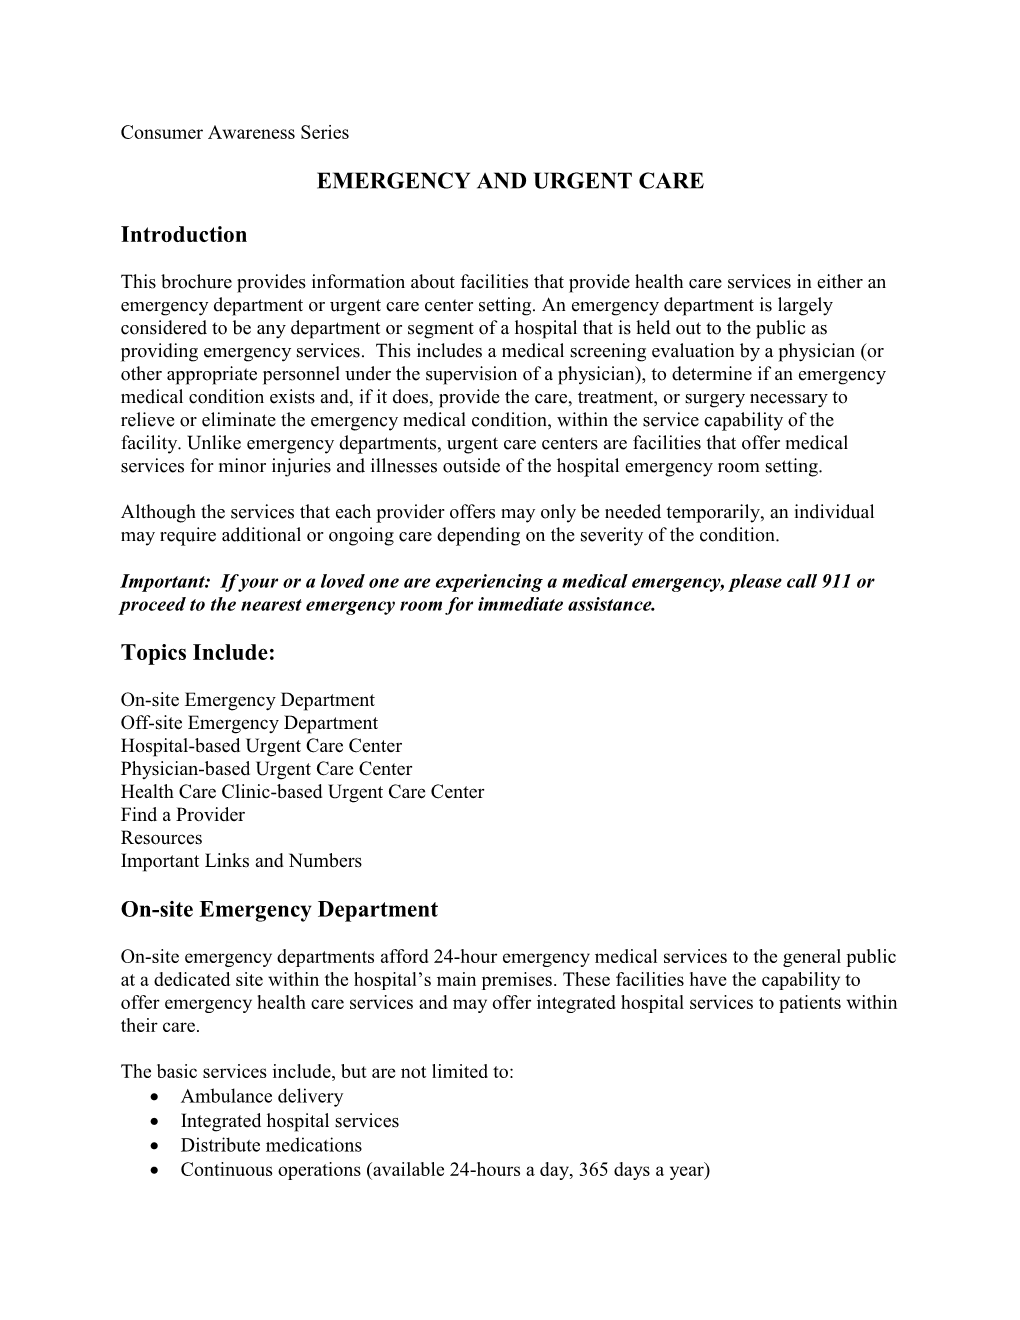 EMERGENCY and URGENT CARE Introduction Topics Include